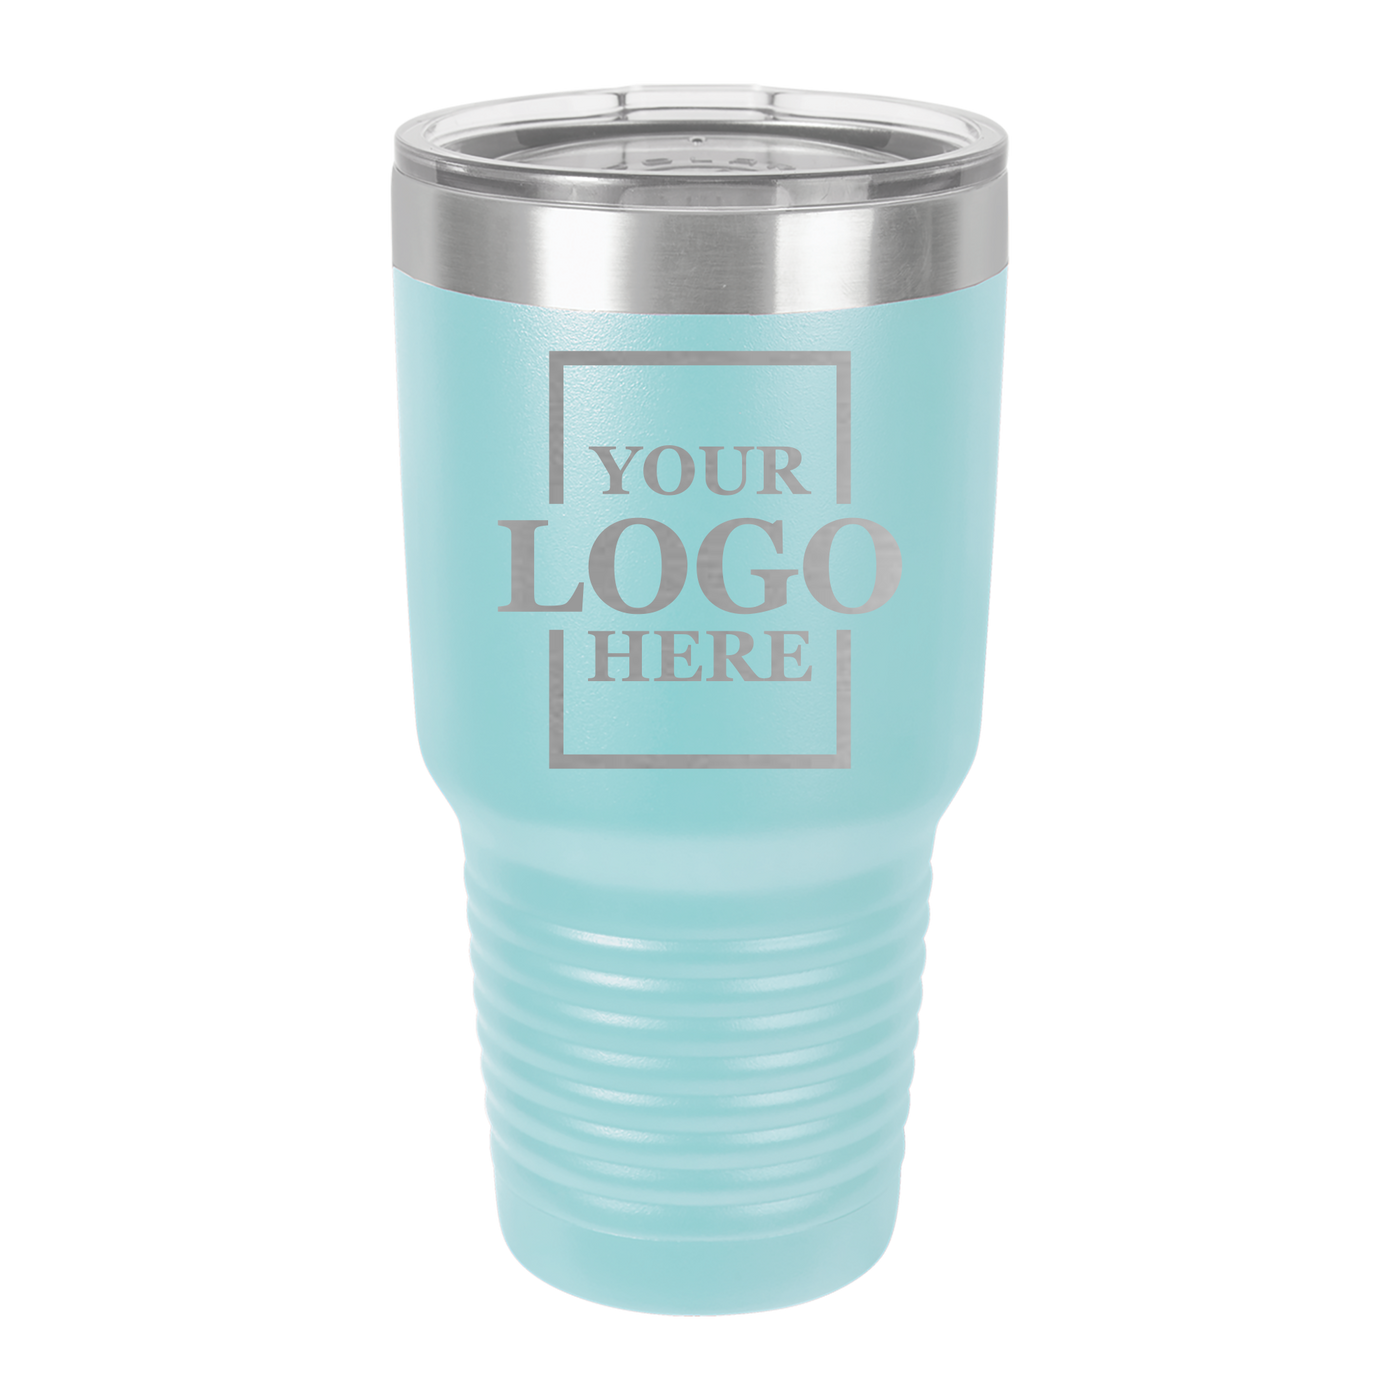 Branded tumlber Branded Drinkware Realtor Branded Merch Engraved tumlber Custom Closing Gift Client Gift Customer Gift Employee Gift Personalized coffee cup coffee tumlber drinkware promotional products promotional drinkware real estate team merch team gifts birthday gifts realtor drinkware